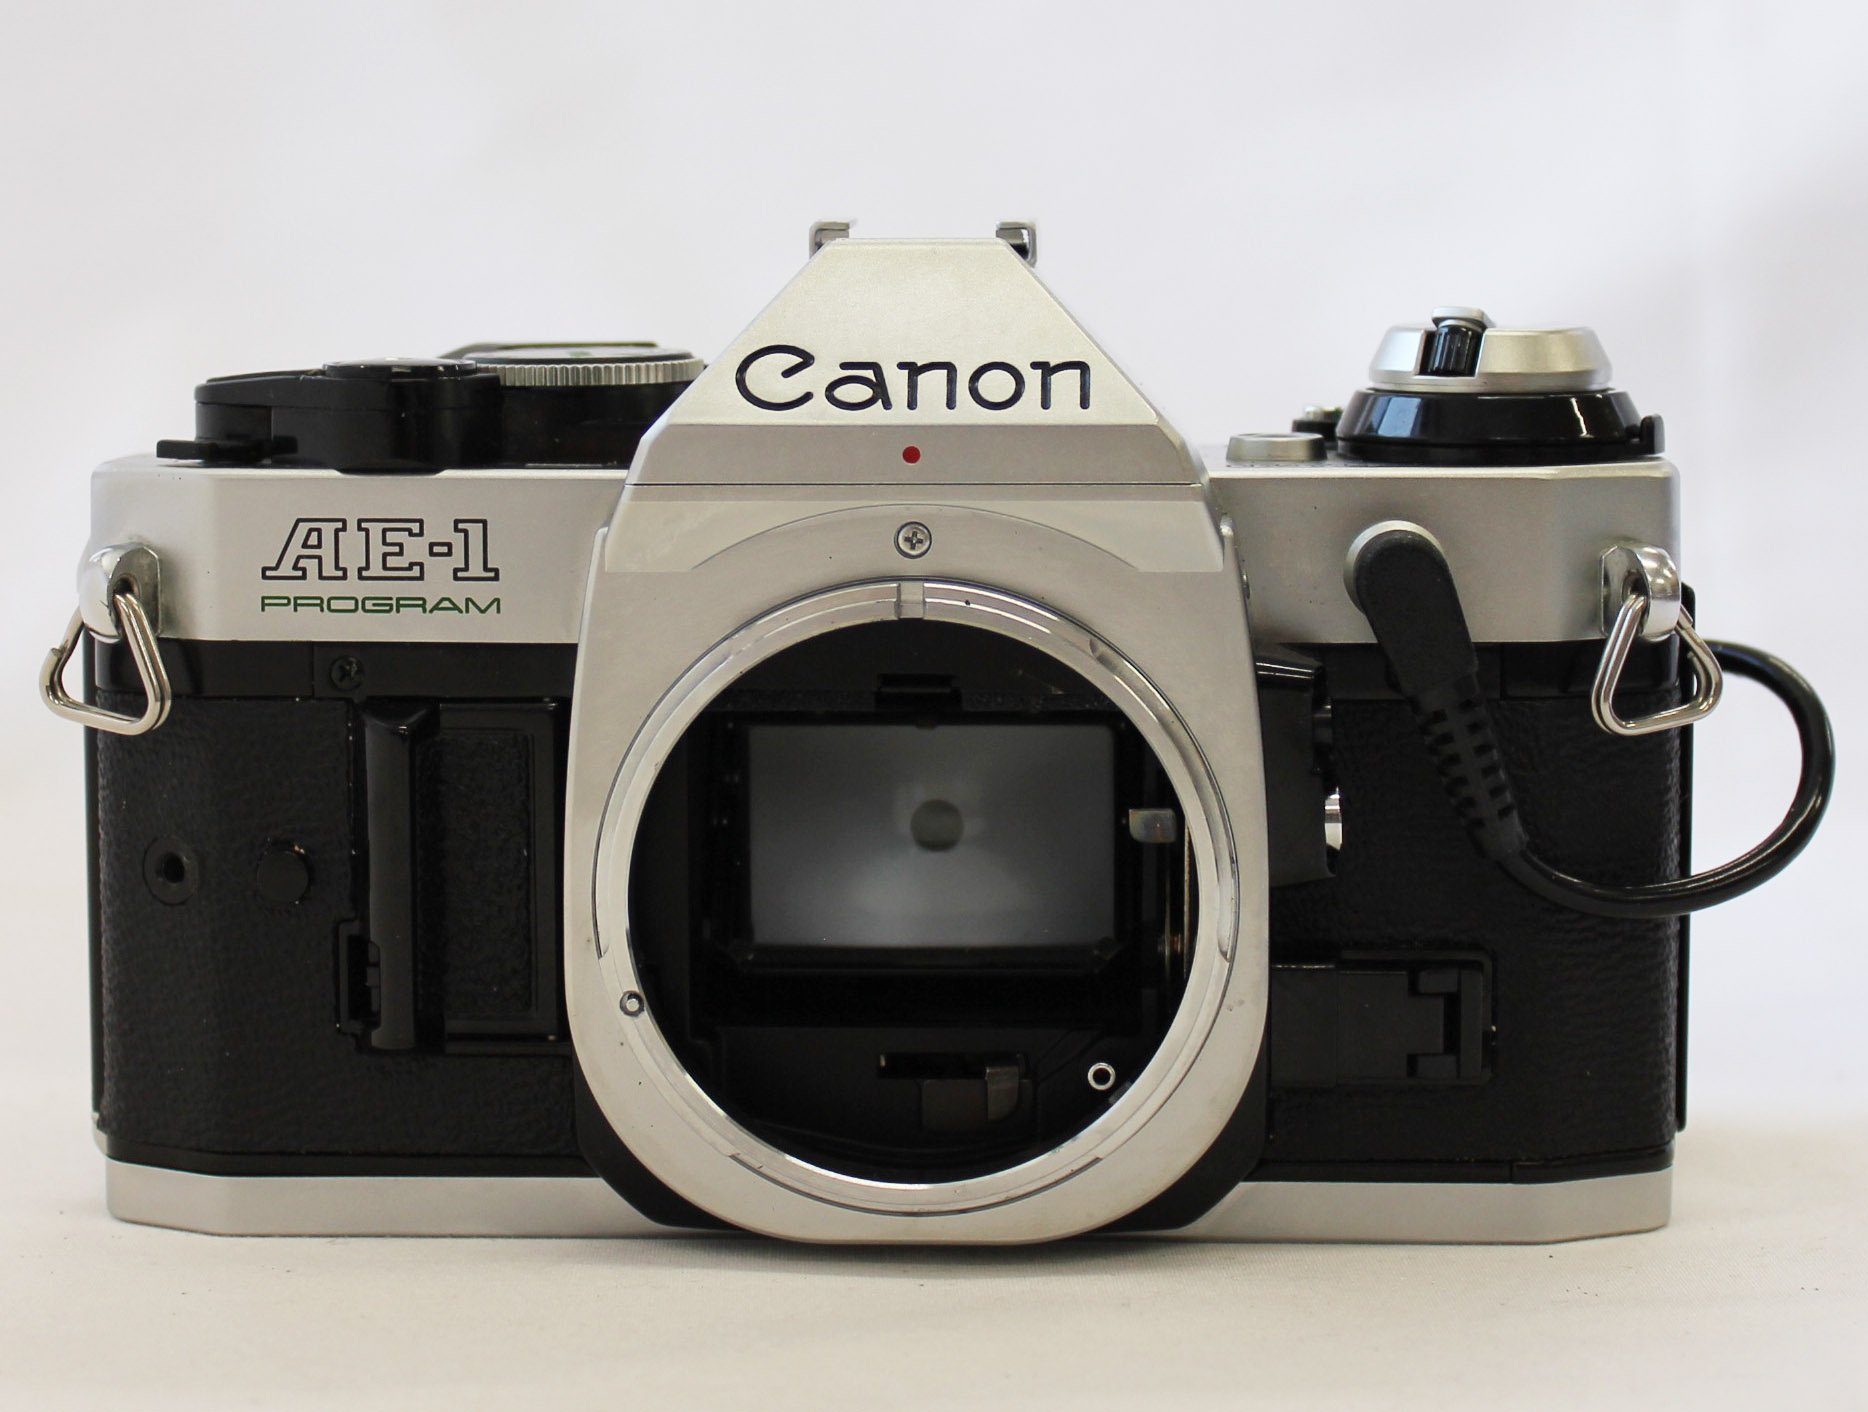 Canon AE-1 Program 35mm SLR Film Camera with New FD 50mm F/1.4 and 